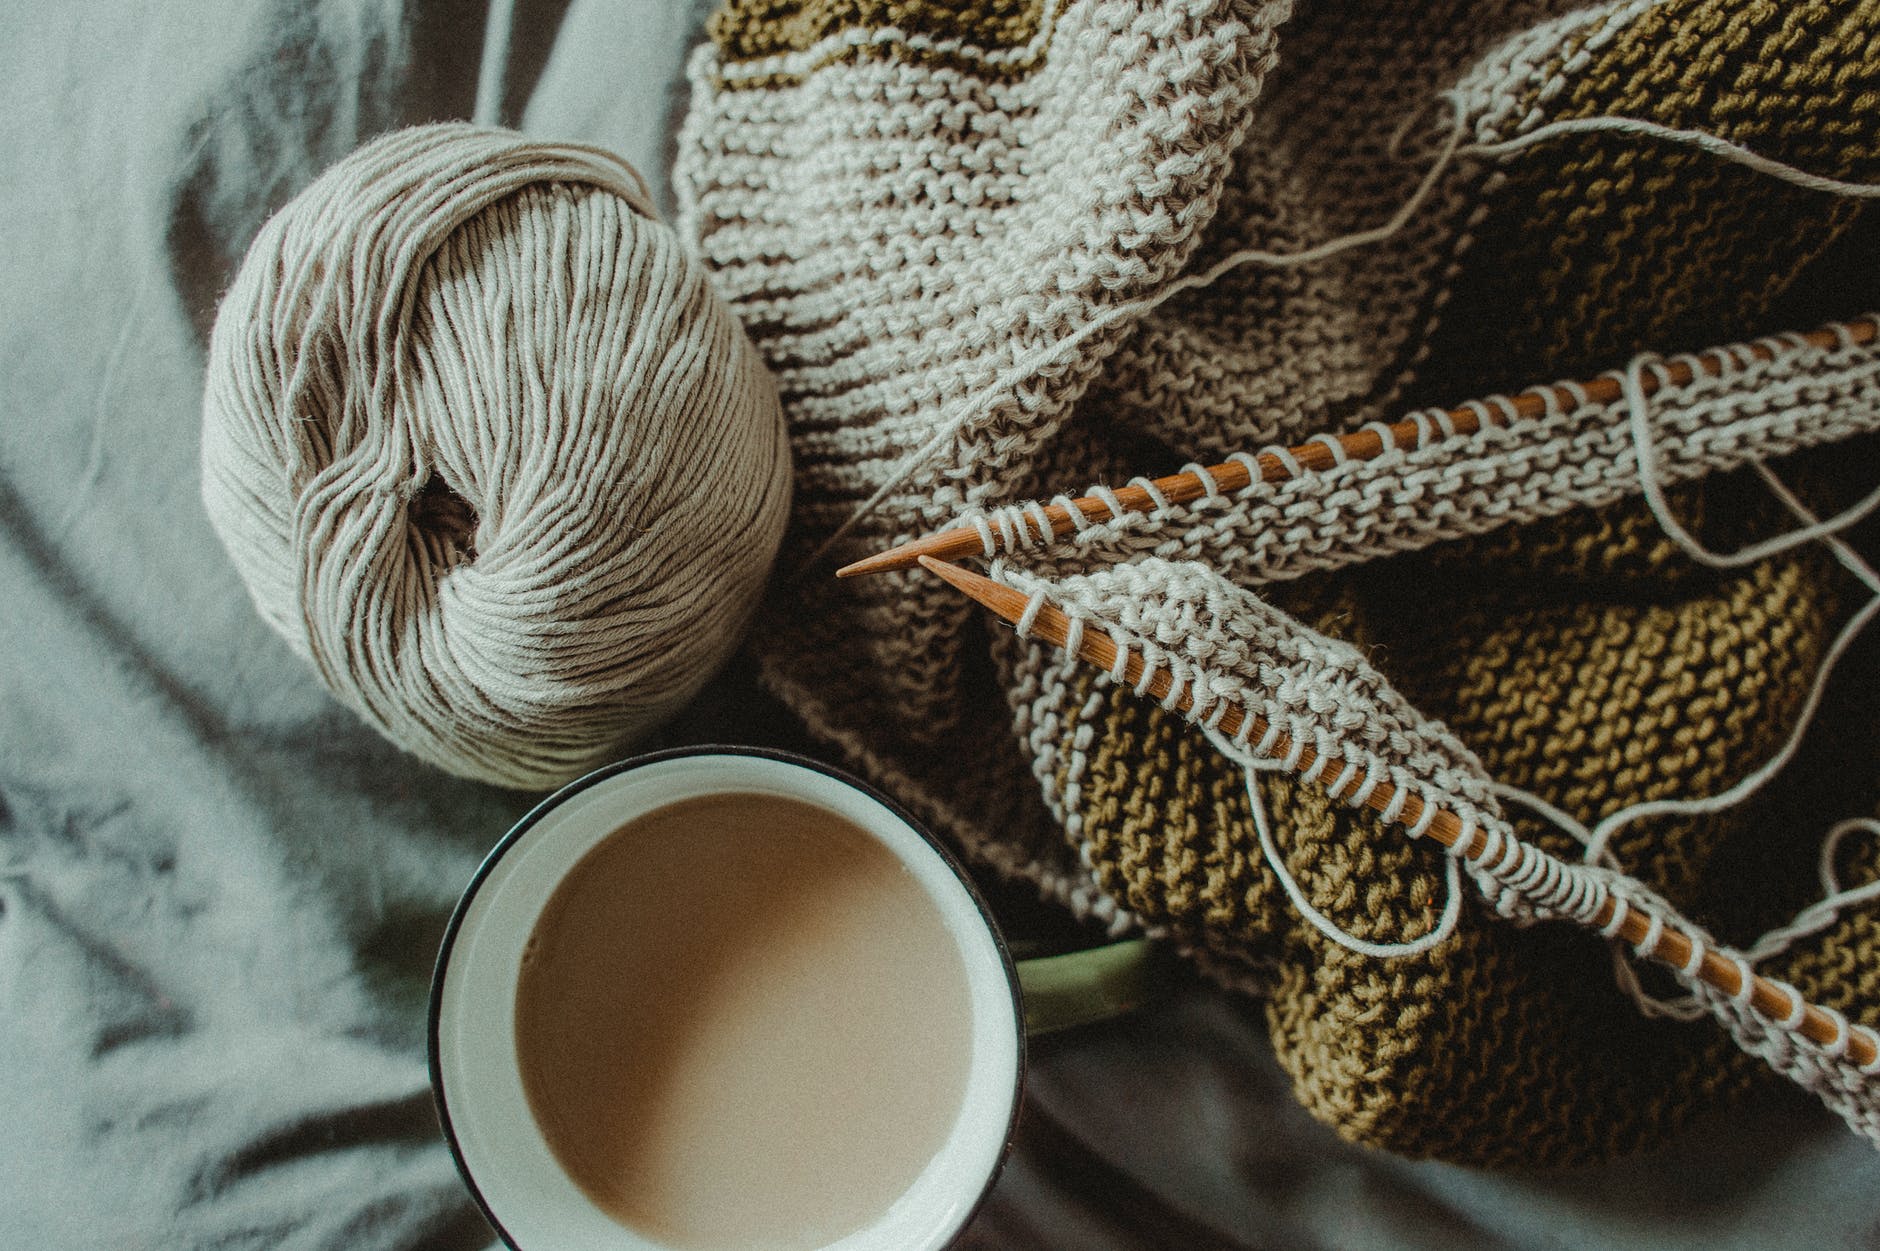 knitting supplies and cup of coffee placed on bed